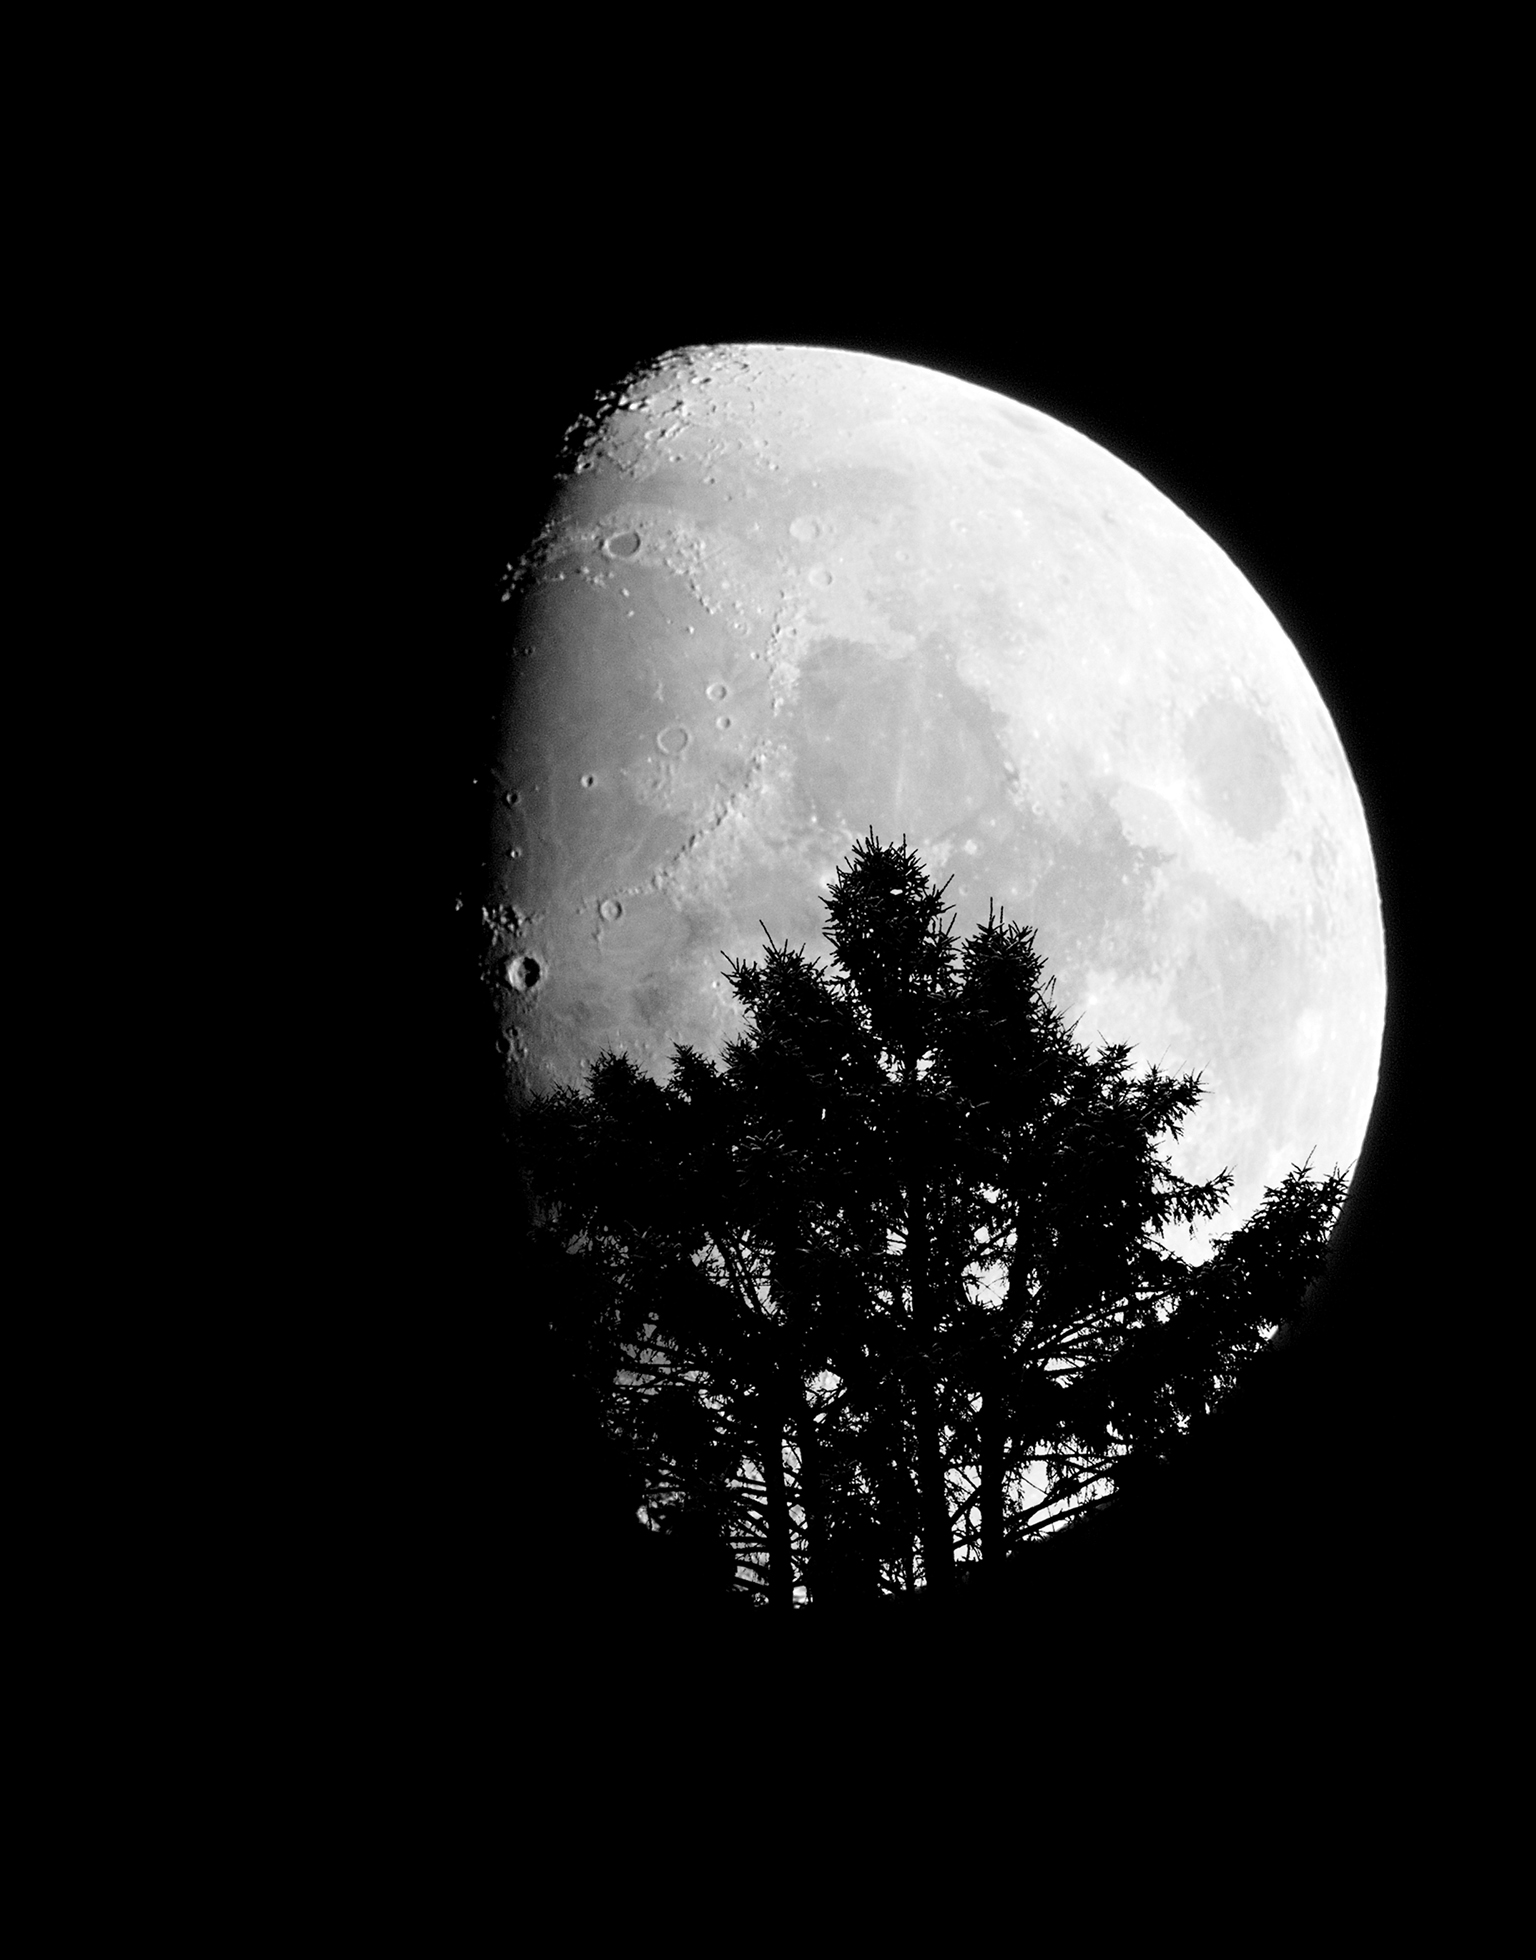 A close-up of a bright full moon against a black background with a portion of the left of the moon in shadow. The bottom of the moon is obscured by the tops of a cluster of trees, but the brightness of the moon peeks through the trunks and branches.